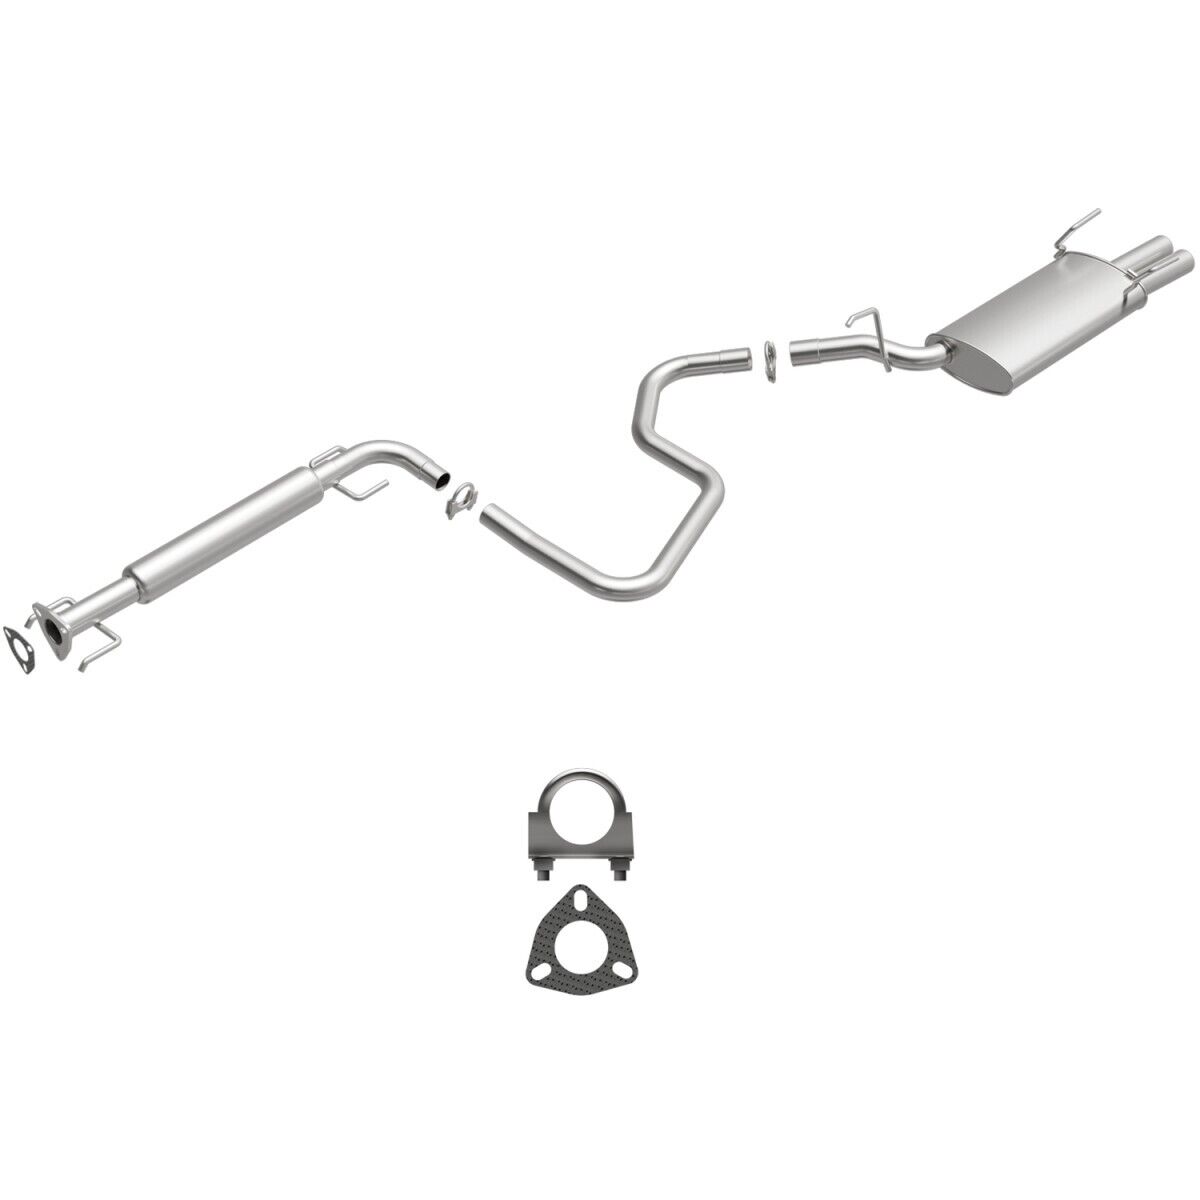 106-0587 BRExhaust Exhaust System for Saturn L300 LS2 LW300 LW2 2000